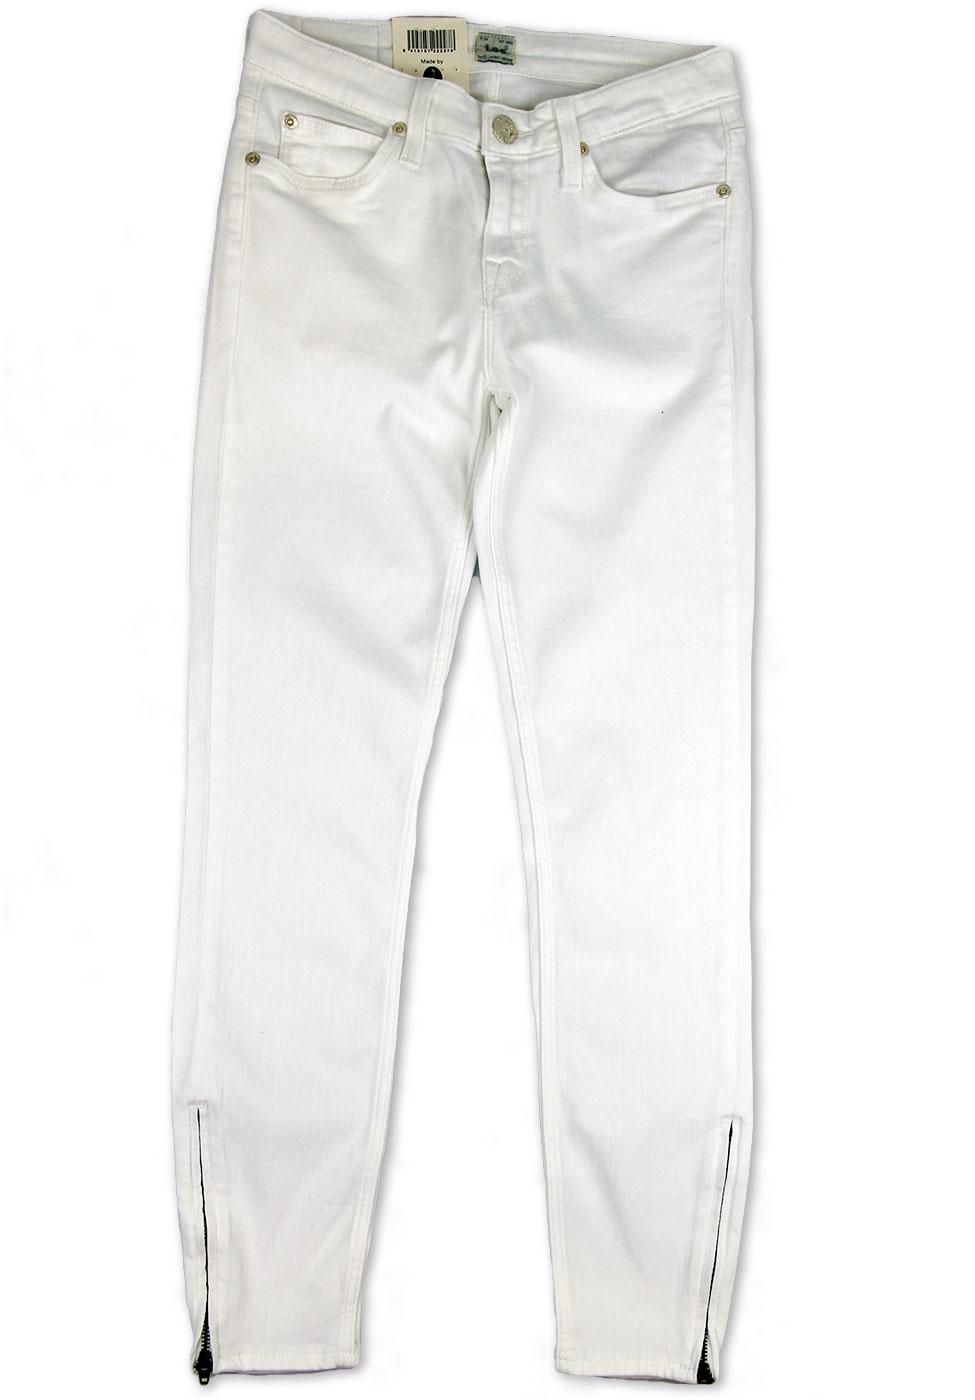 LEE Scarlett Cropped Retro Indie Mod Skinny Fit Jeans White